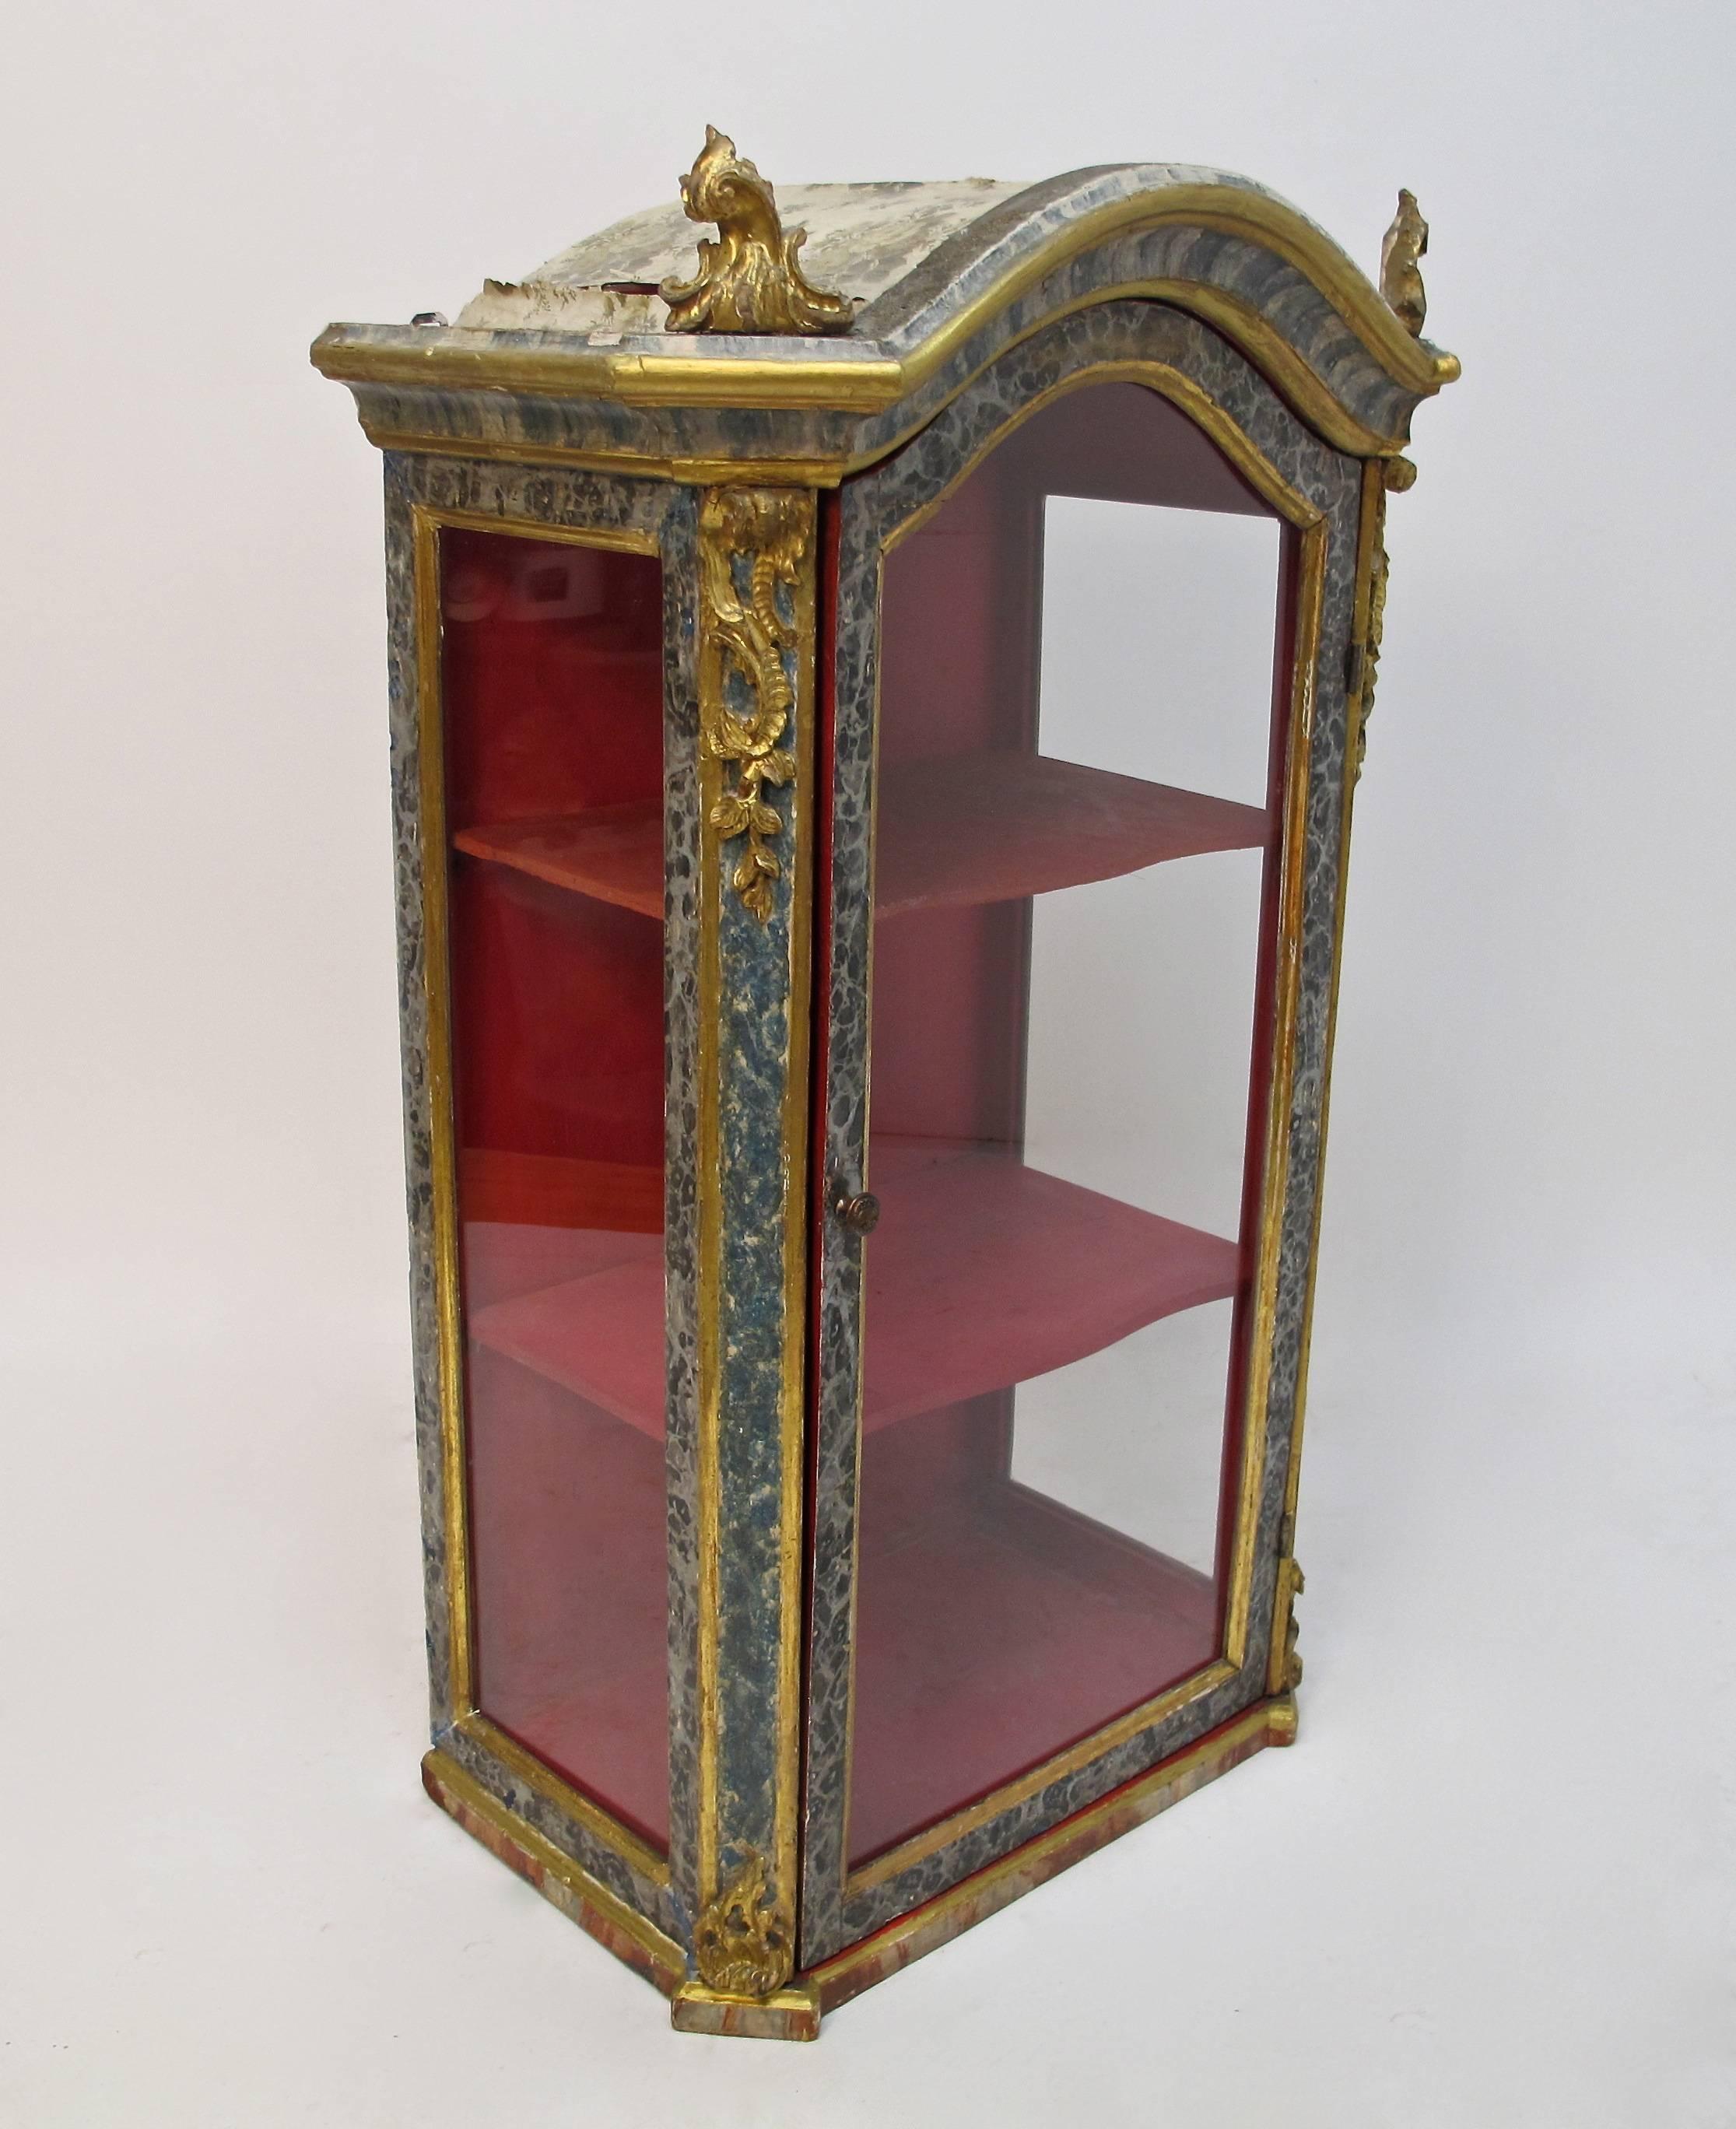 Hand-Painted 18th Century Venetian Painted Cabinet For Sale